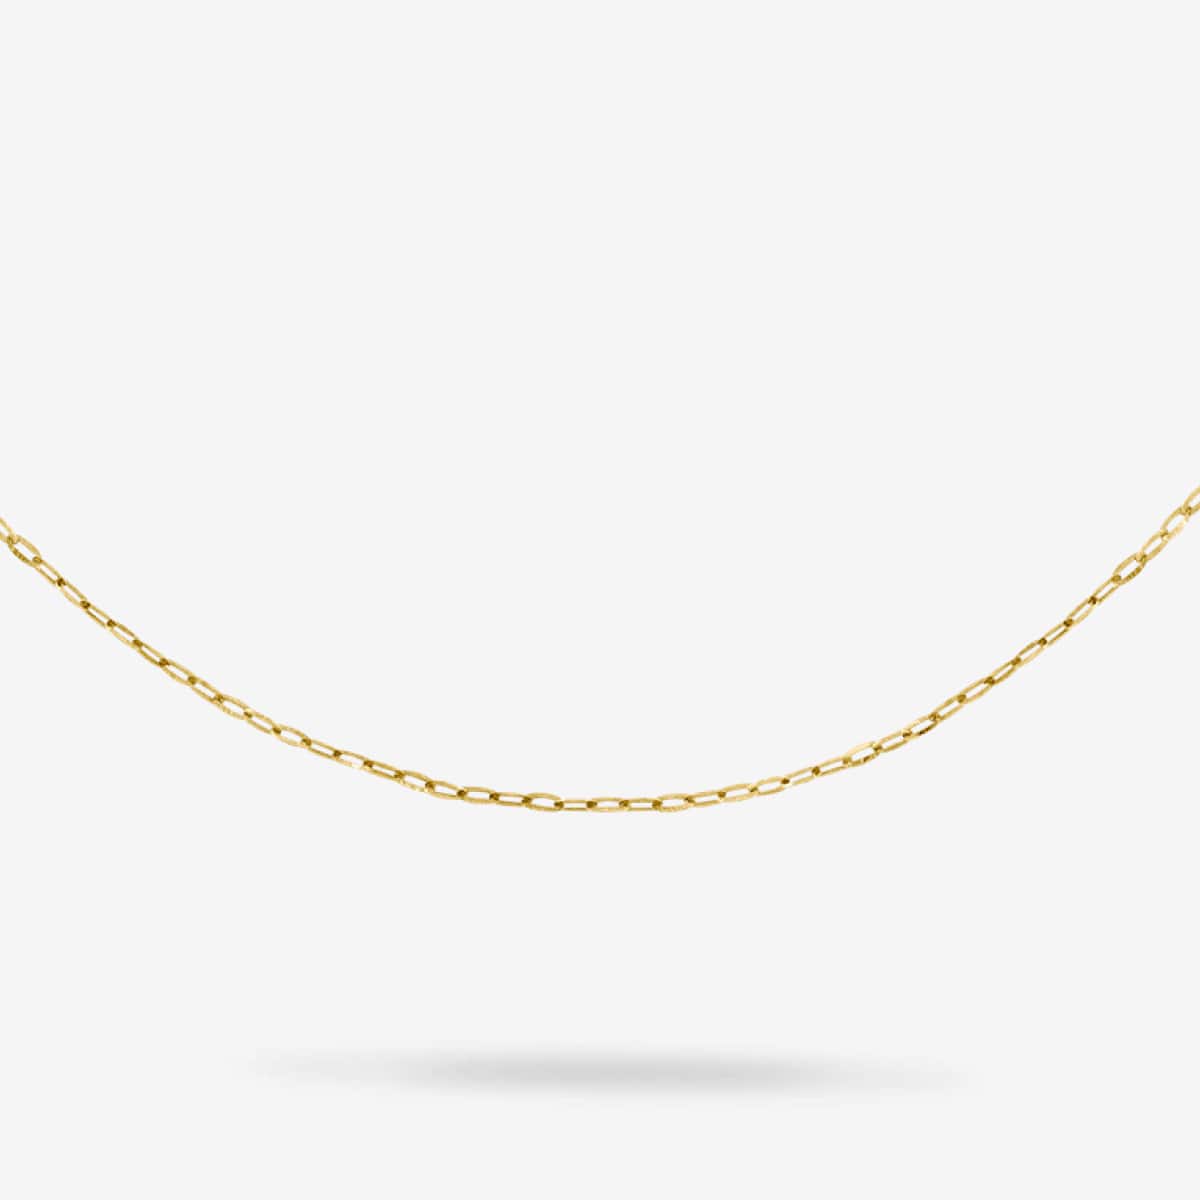 Buy 40 Inch Silver Chain Online In India - Etsy India